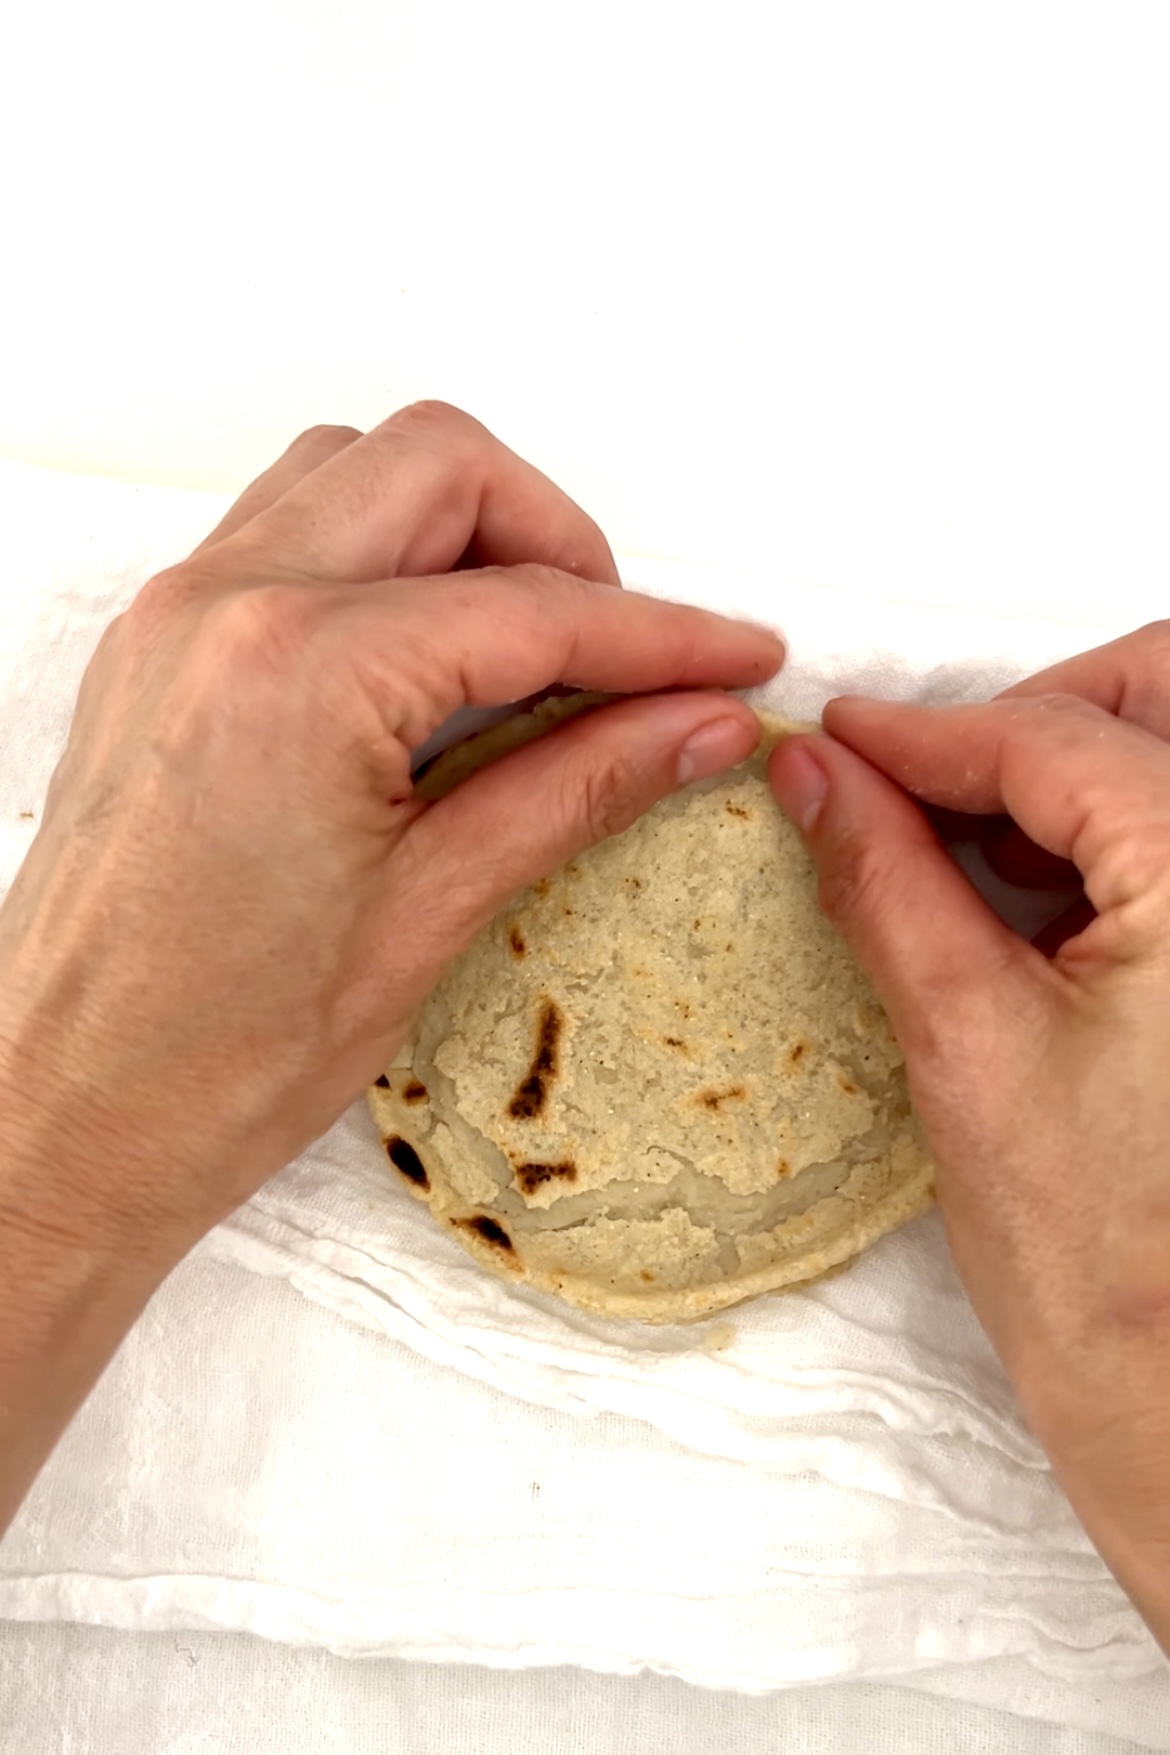 pinching  the sope borderover a white kitchen towel